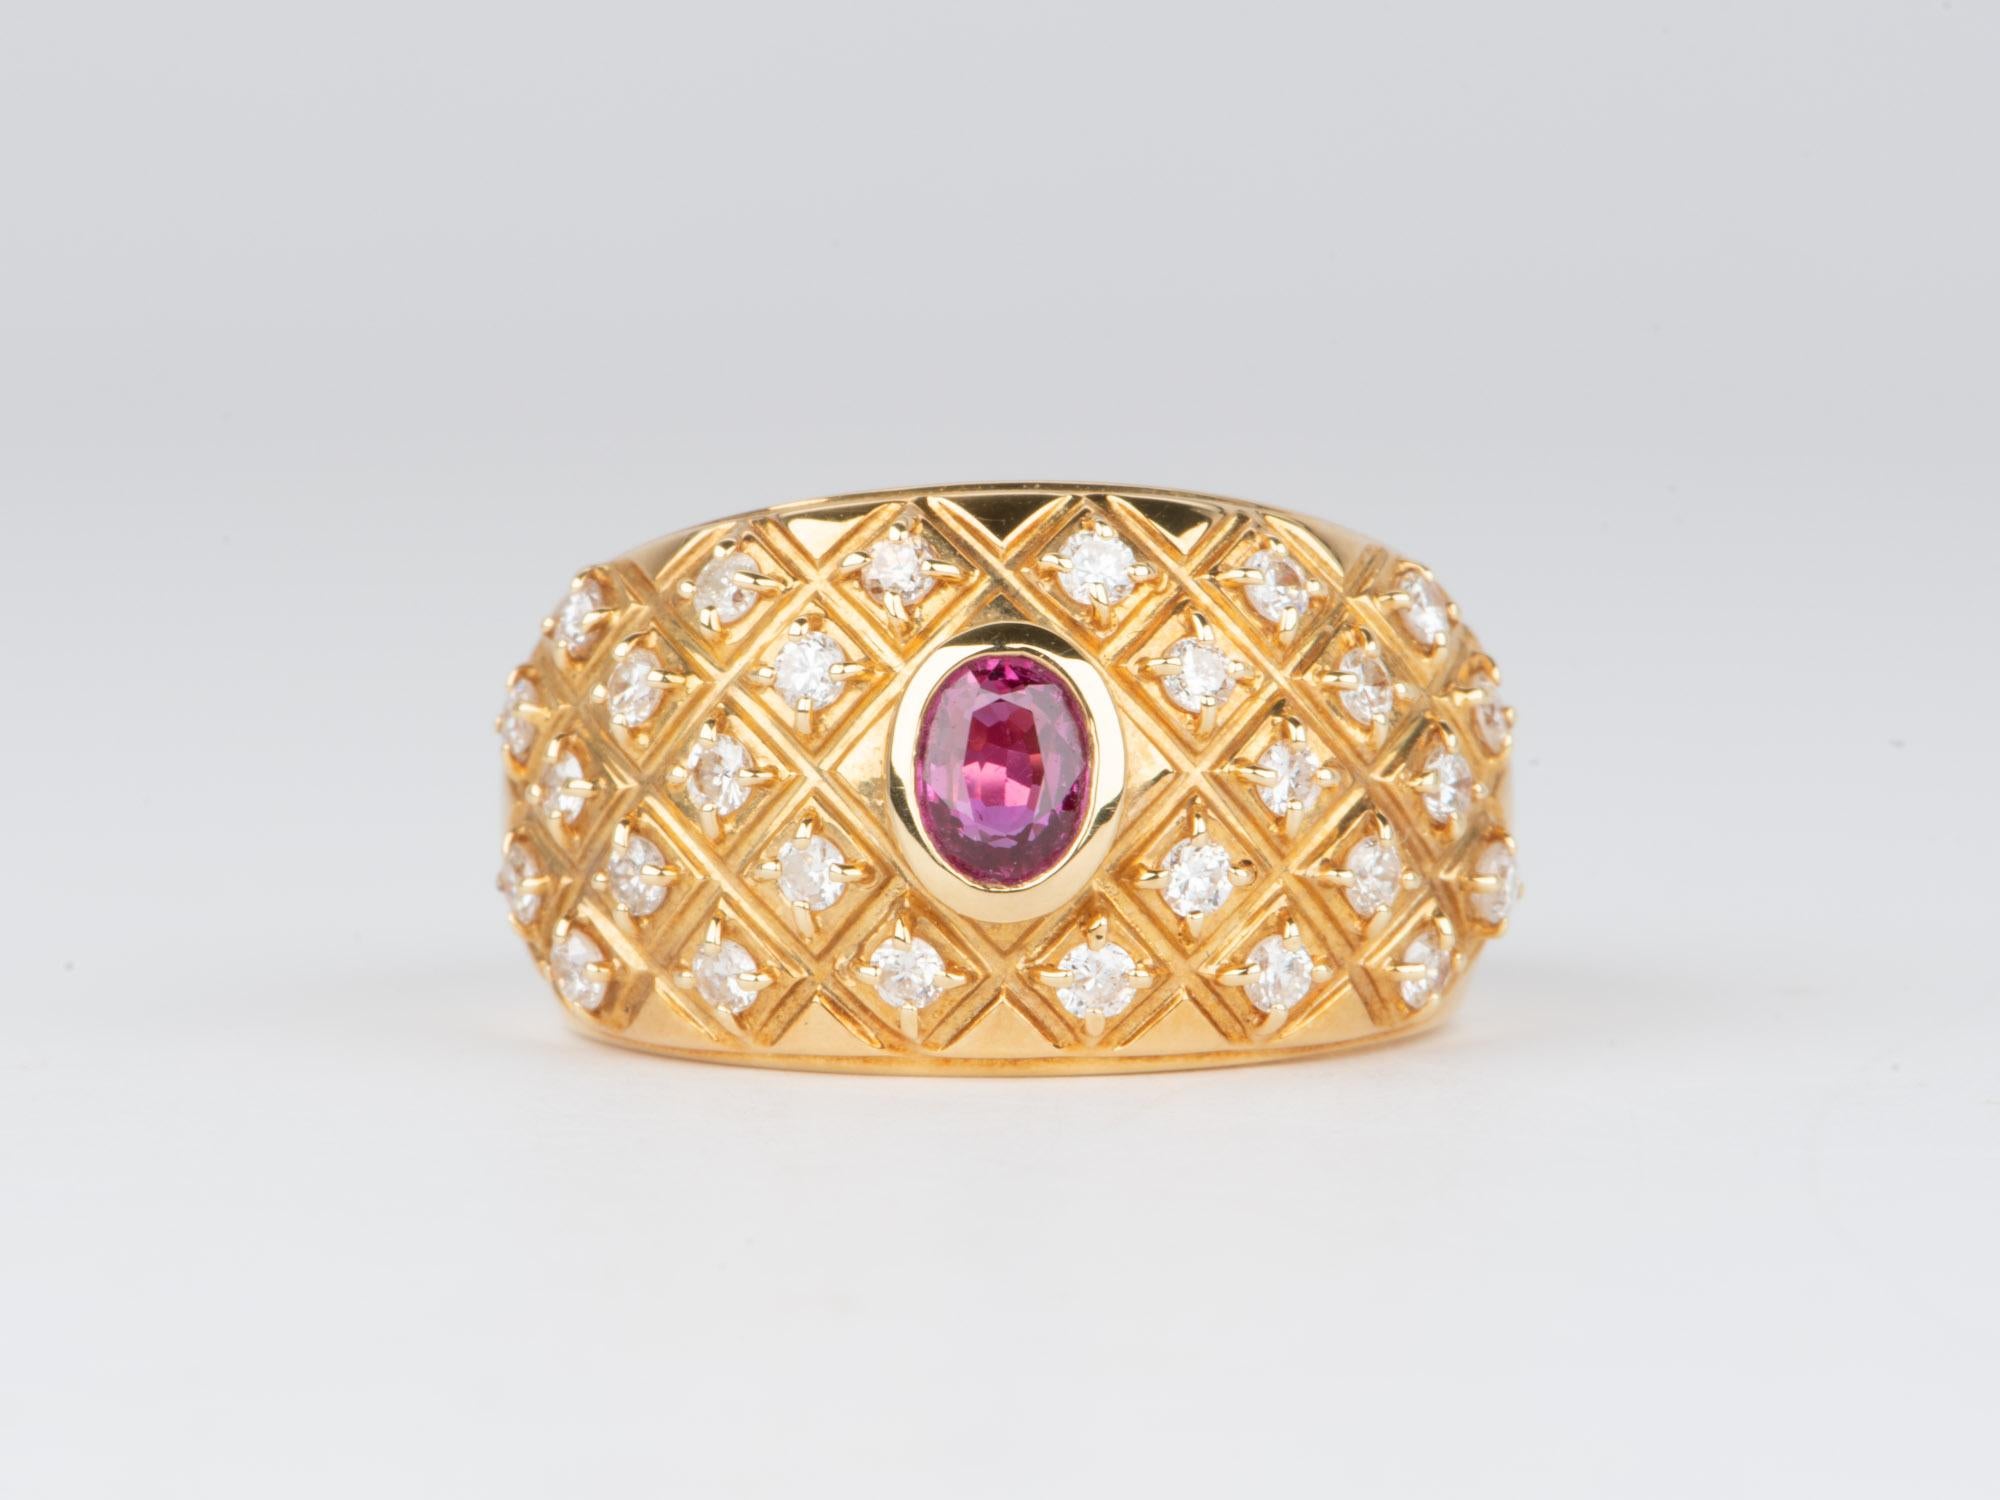 Experience true luxury and sophistication with this exquisite Diamond and Ruby Studded Wide Band! Its stunning cluster of diamonds glisten like no other, while its wide band is designed for maximum comfort and everyday wear. Enjoy the dazzling